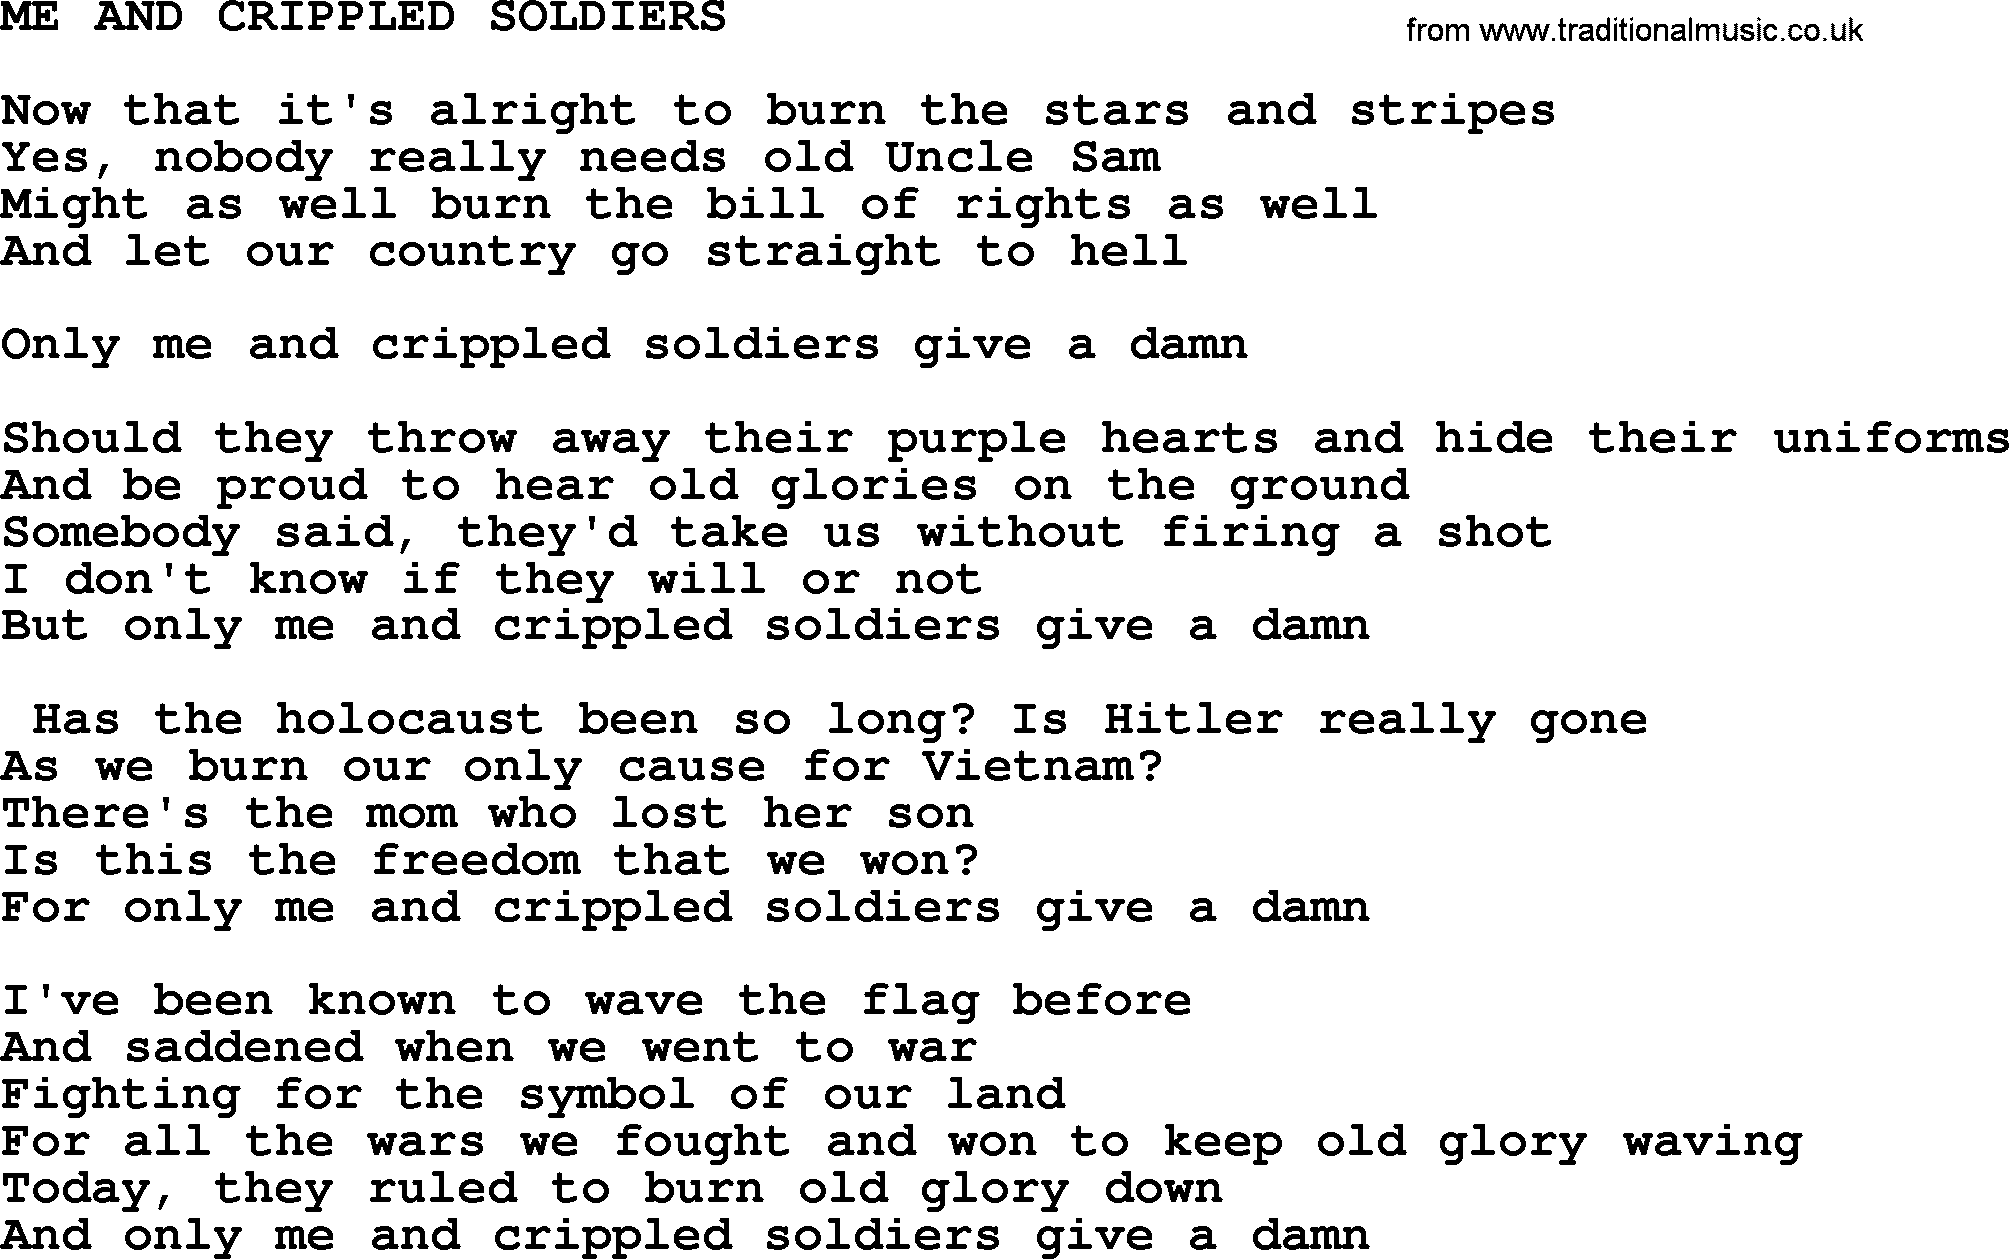 Merle Haggard song: Me And Crippled Soldiers, lyrics.